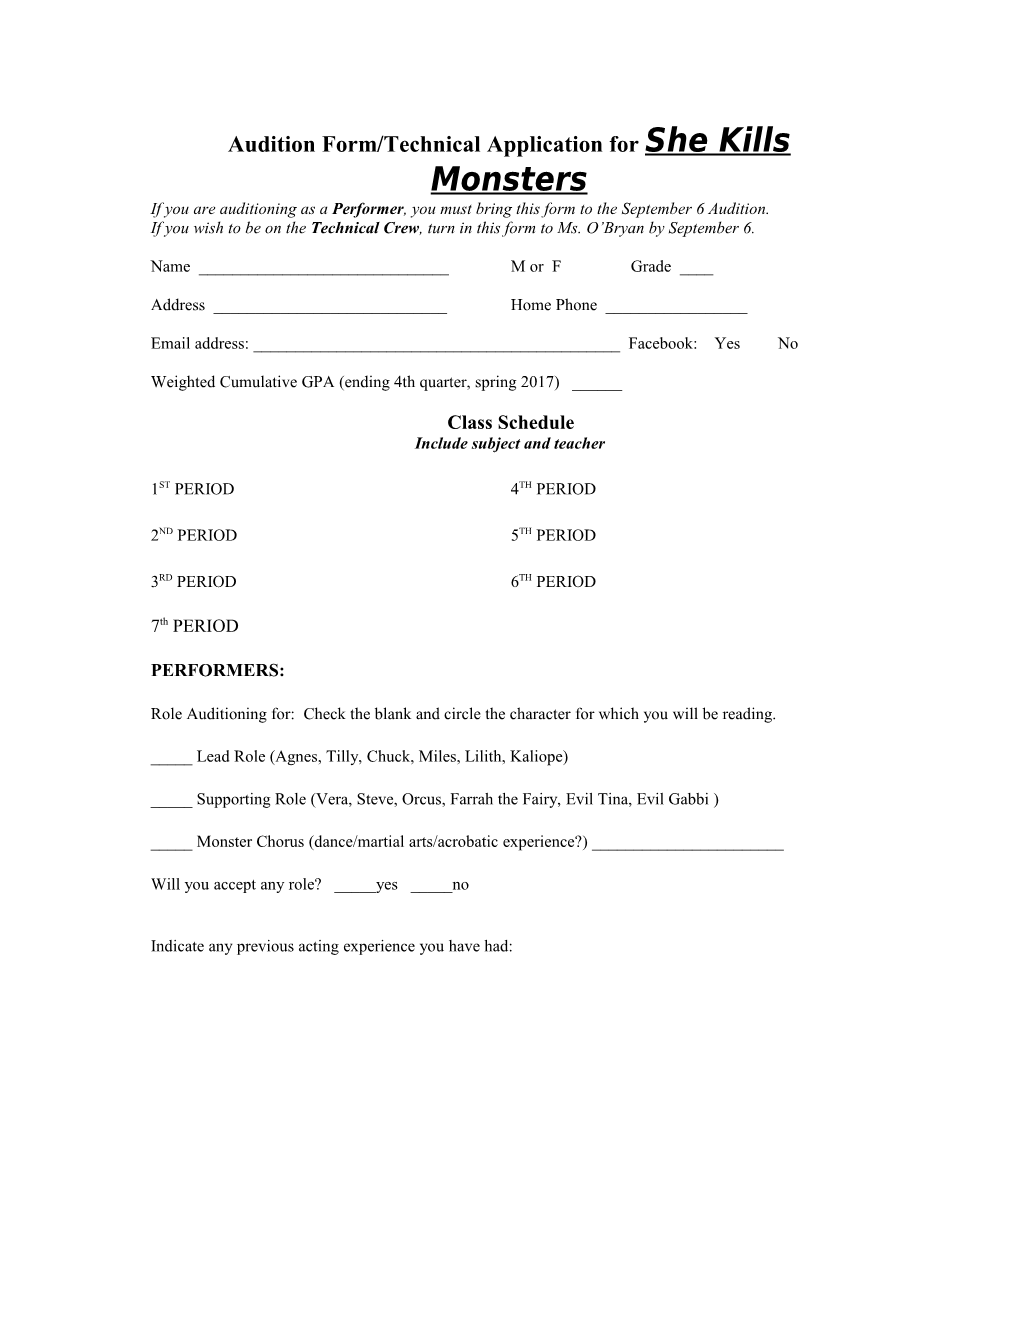 Audition Form/Technical Application for She Kills Monsters